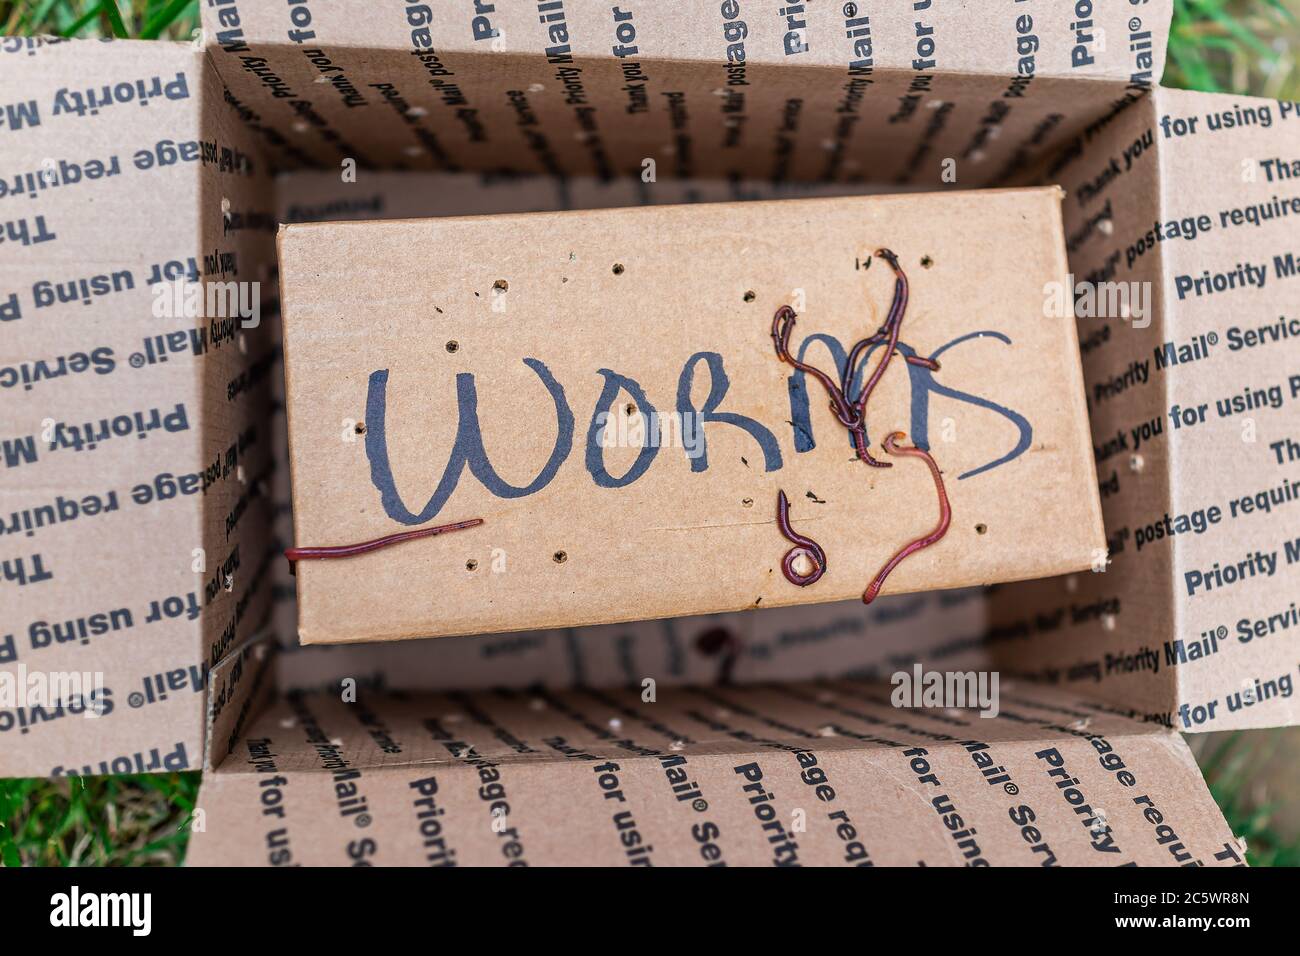 Herndon, USA - April 29, 2020: Worms sign on package delivery box as priority mail from USPS for garden container compost tower and nobody Stock Photo